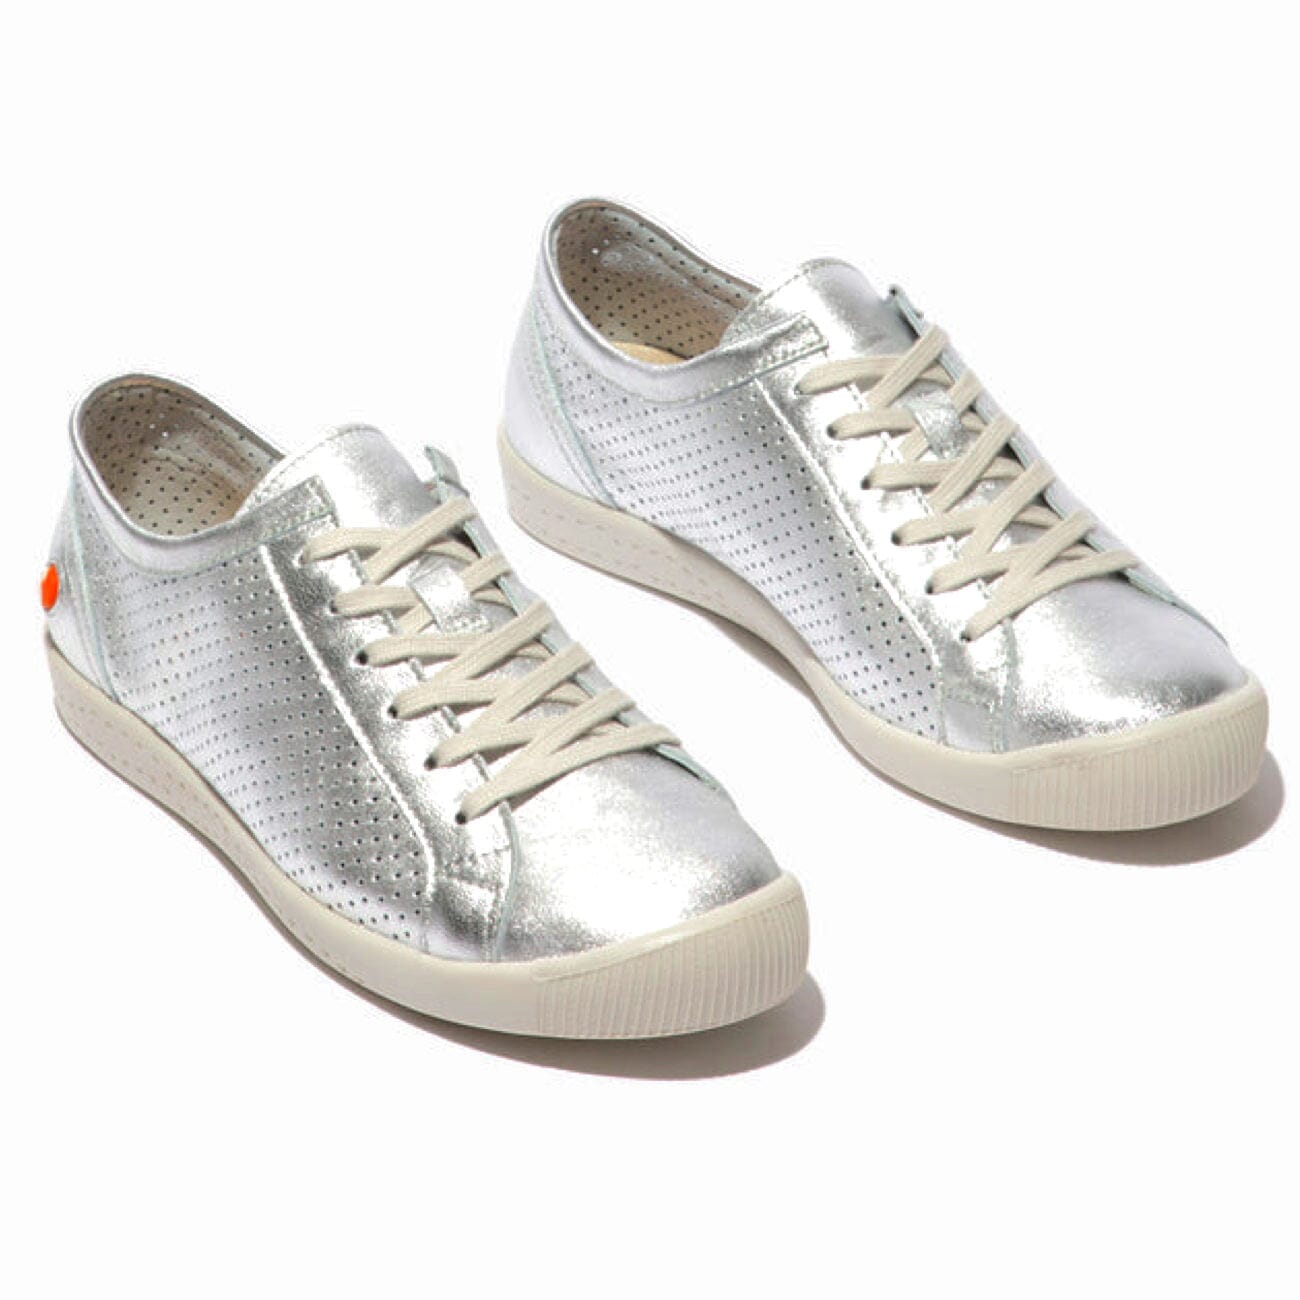 Softinos, Ica388, Laceup Shoe, Laminato Leather, Silver Shoes Softinos Silver 36 